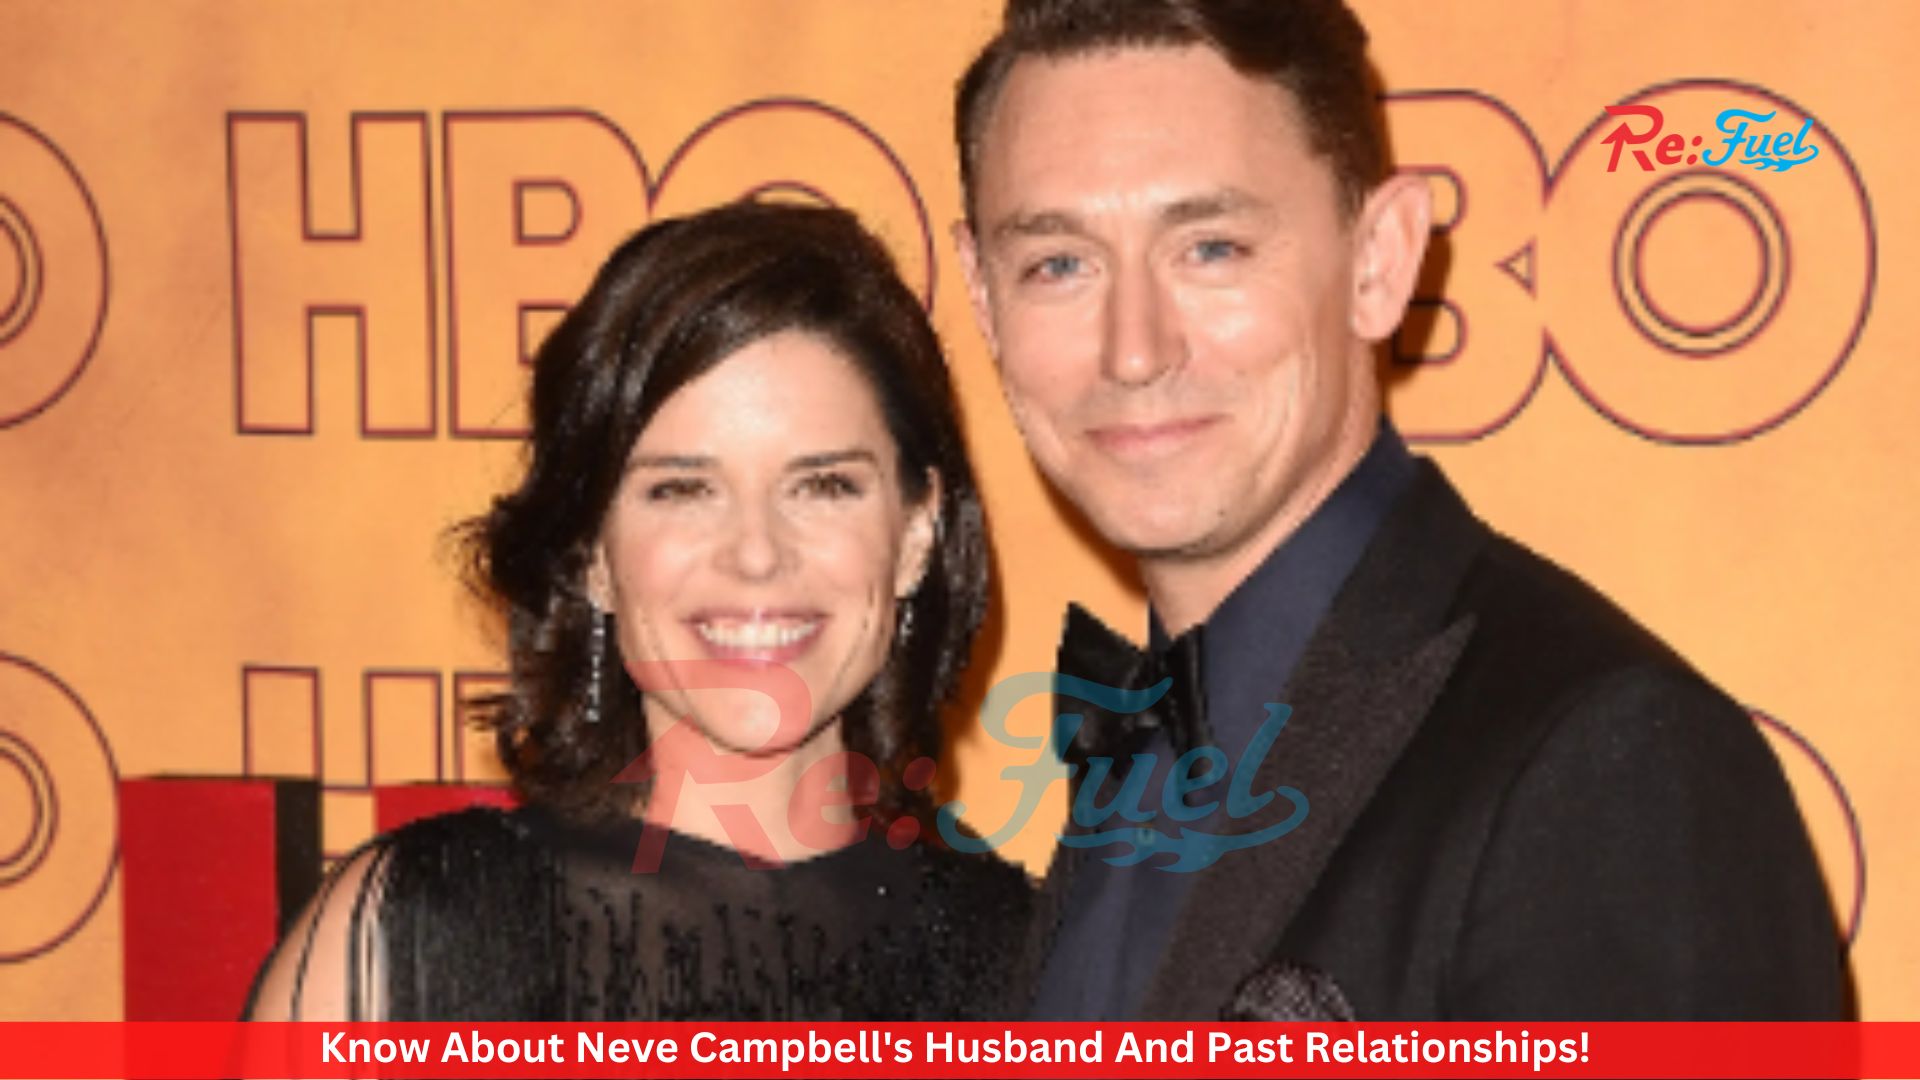 Know About Neve Campbell's Husband And Past Relationships!